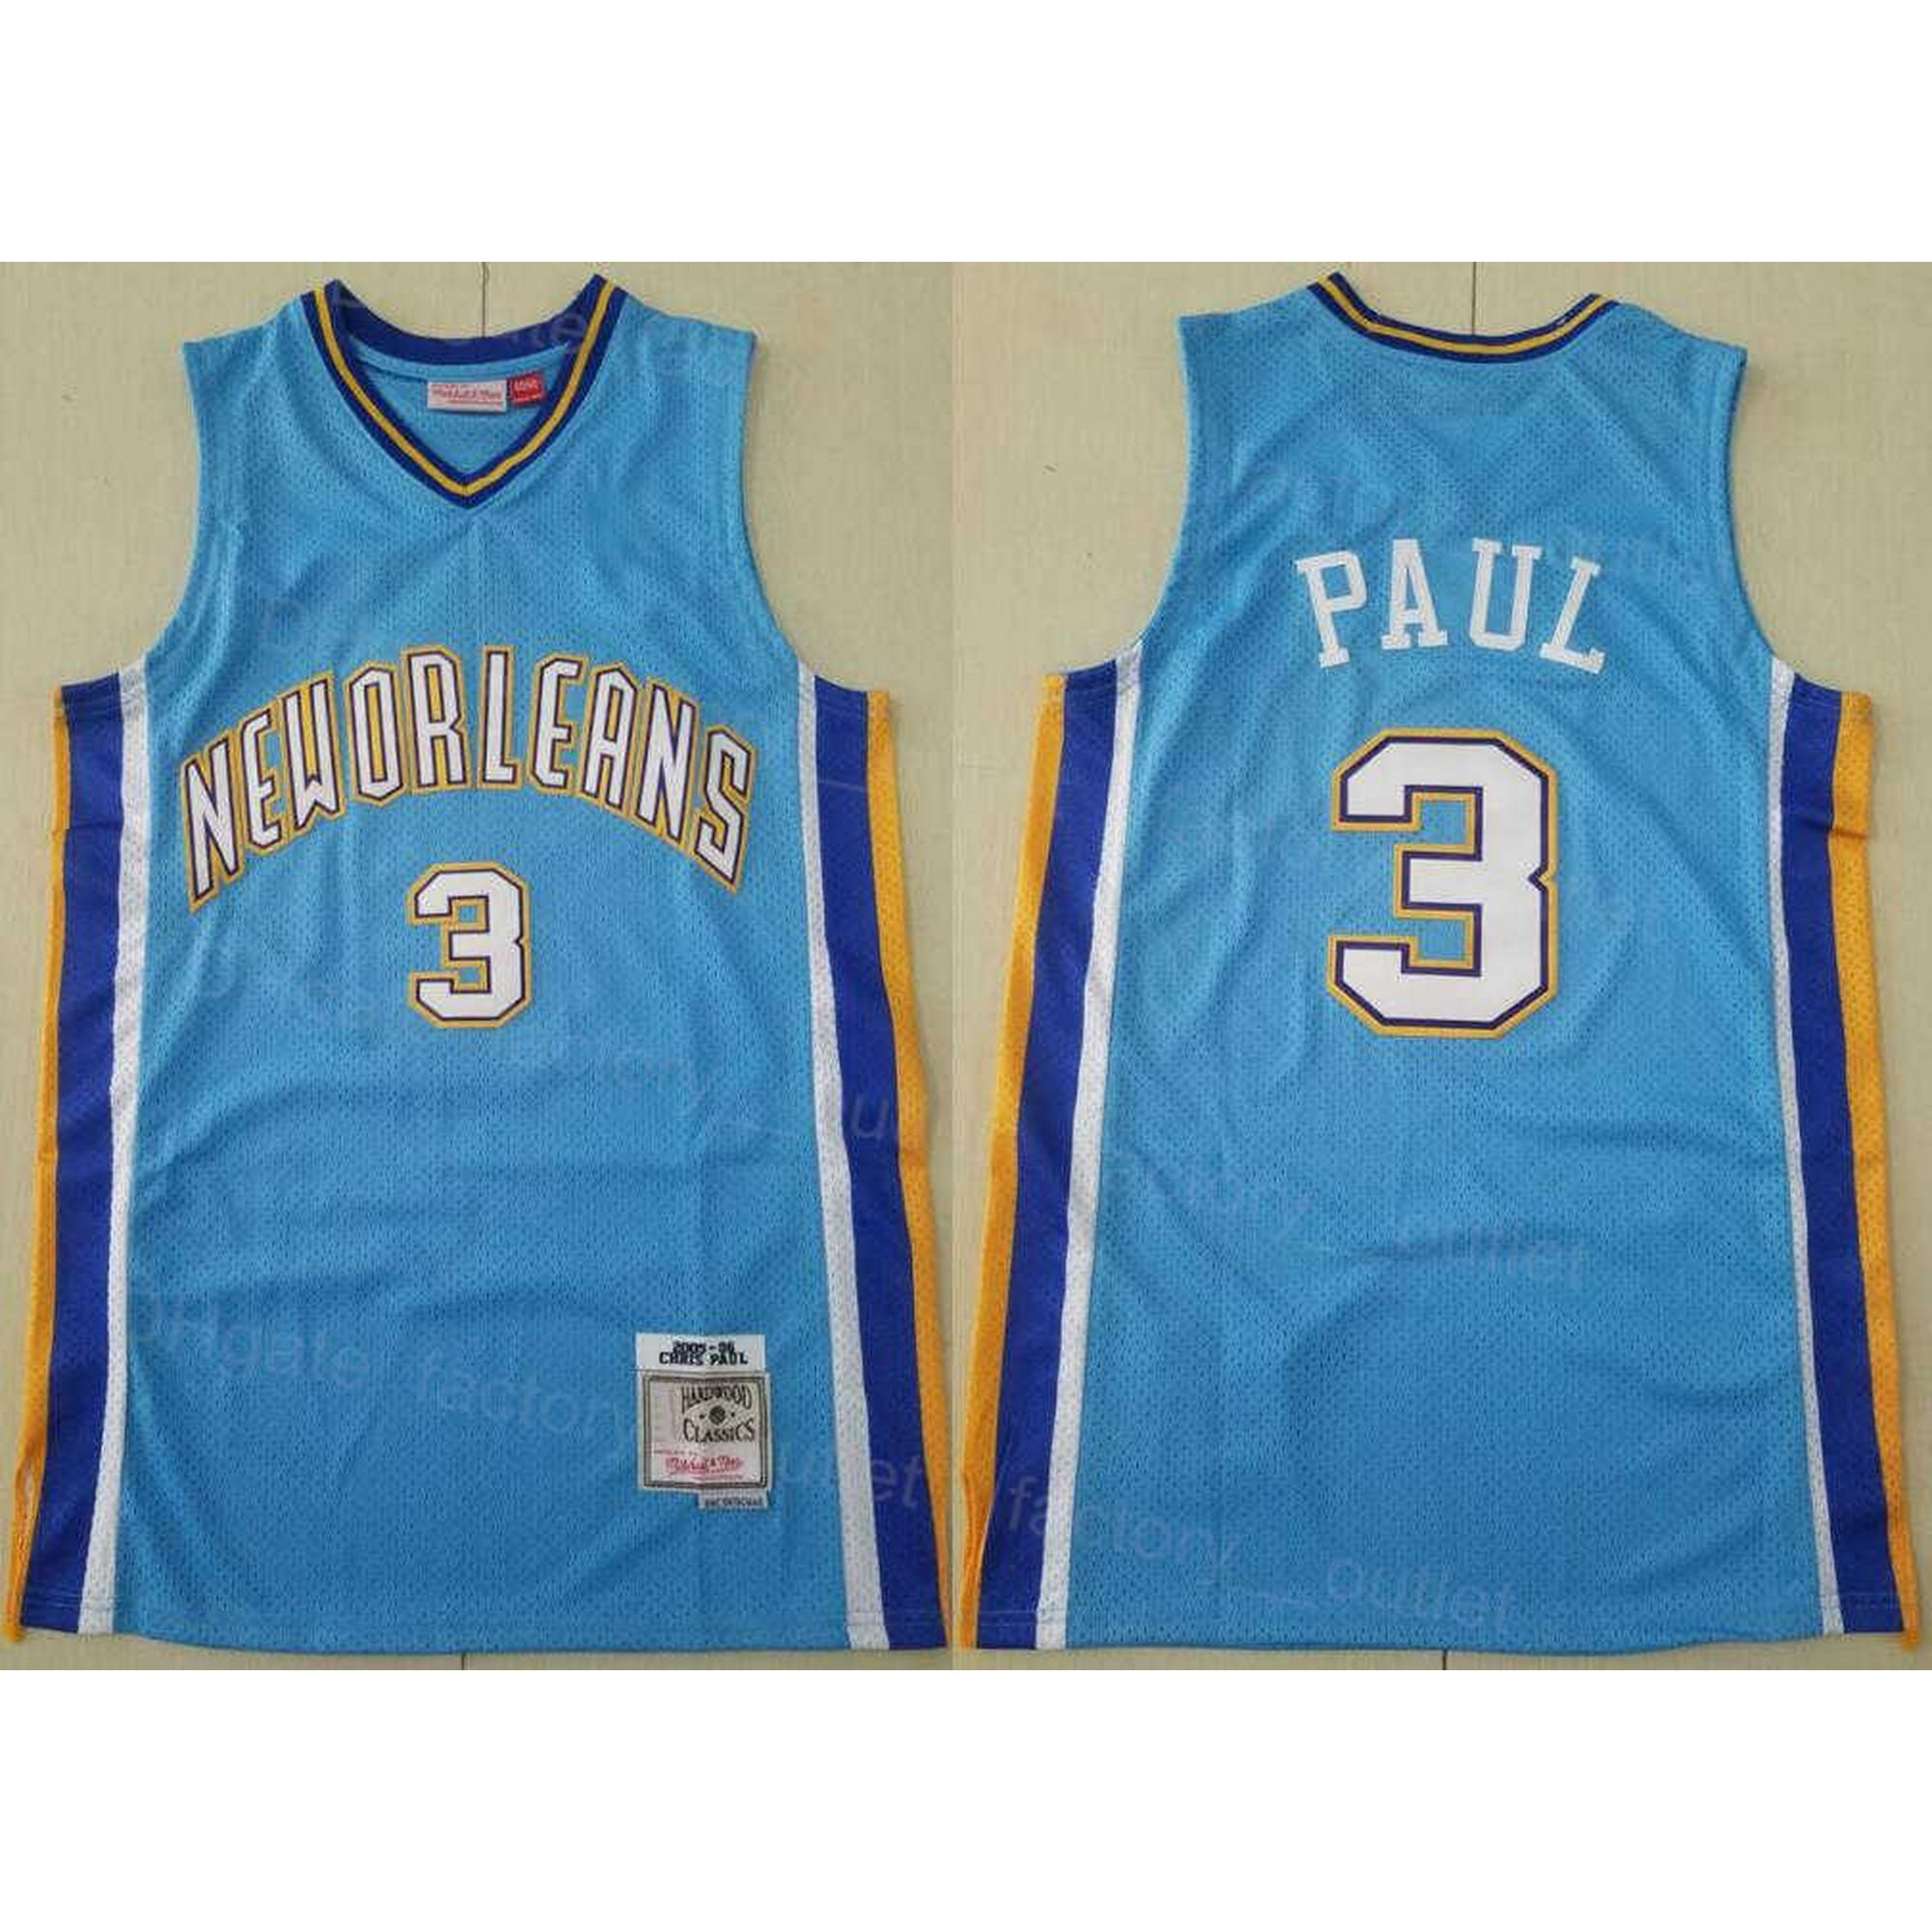 muggsy bogues white jersey